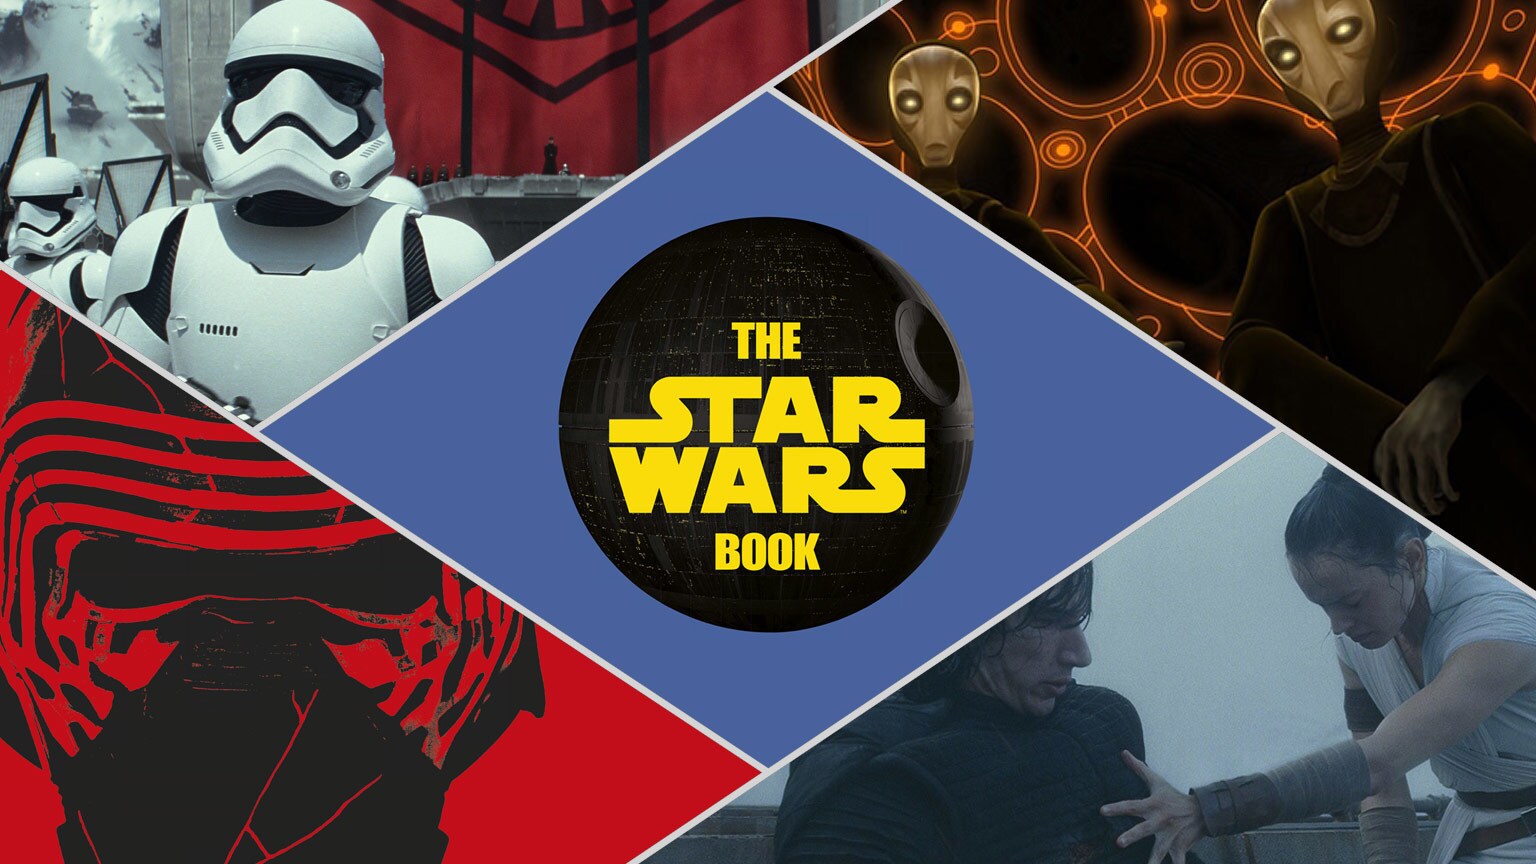 8 Secrets and Fun Facts We Learned from The Star Wars Book